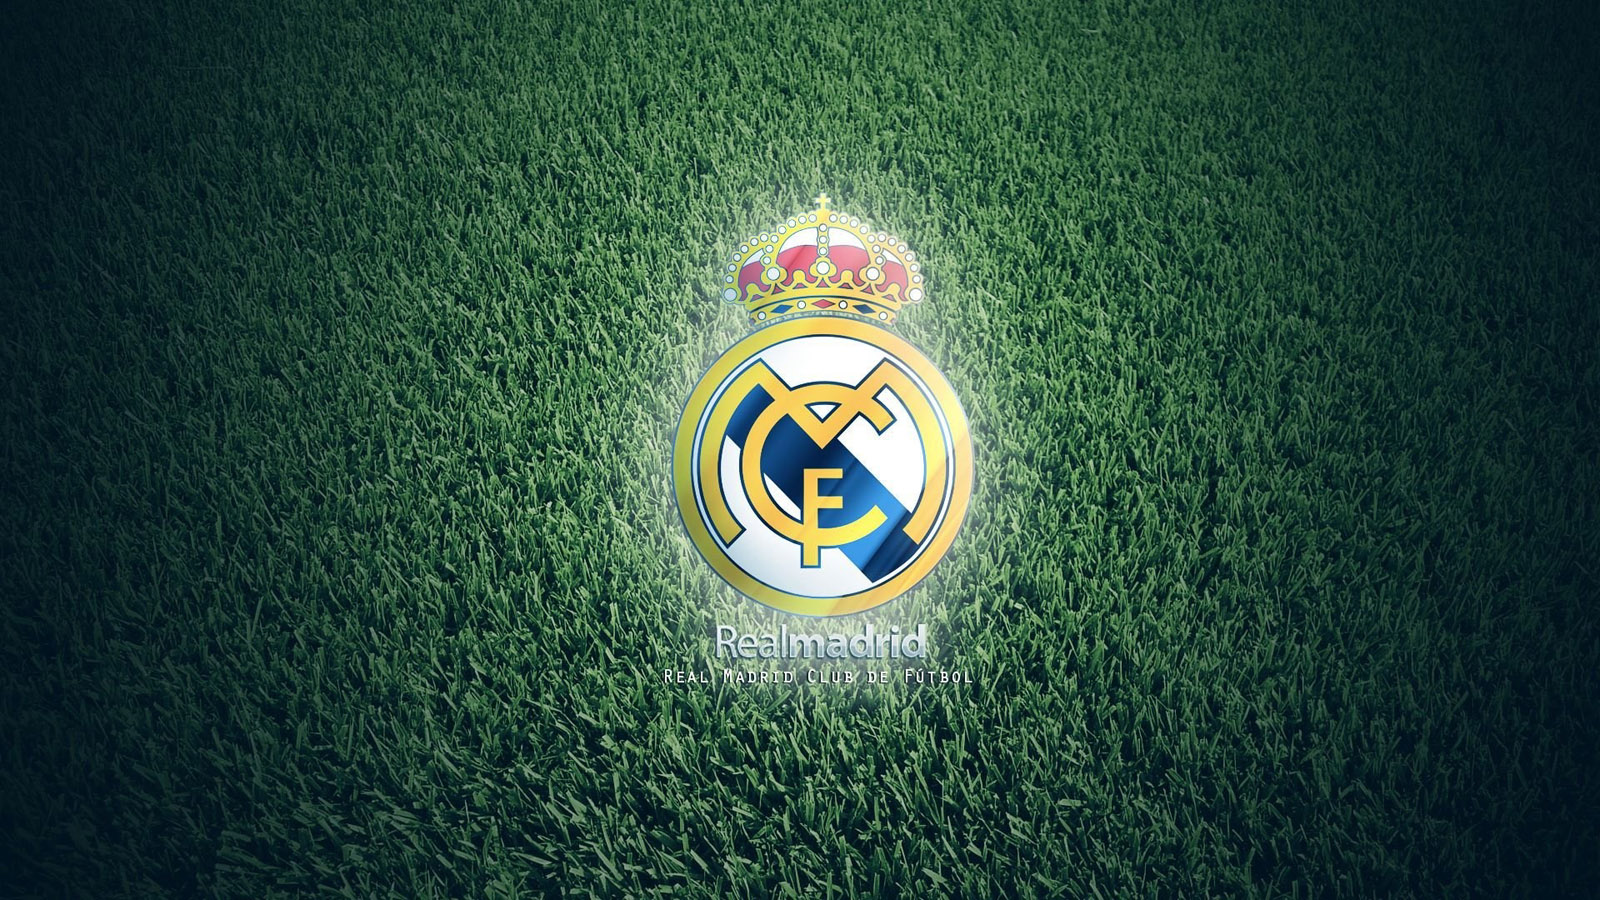 Real Madrid Club De F Tbol Monly Known As Is A